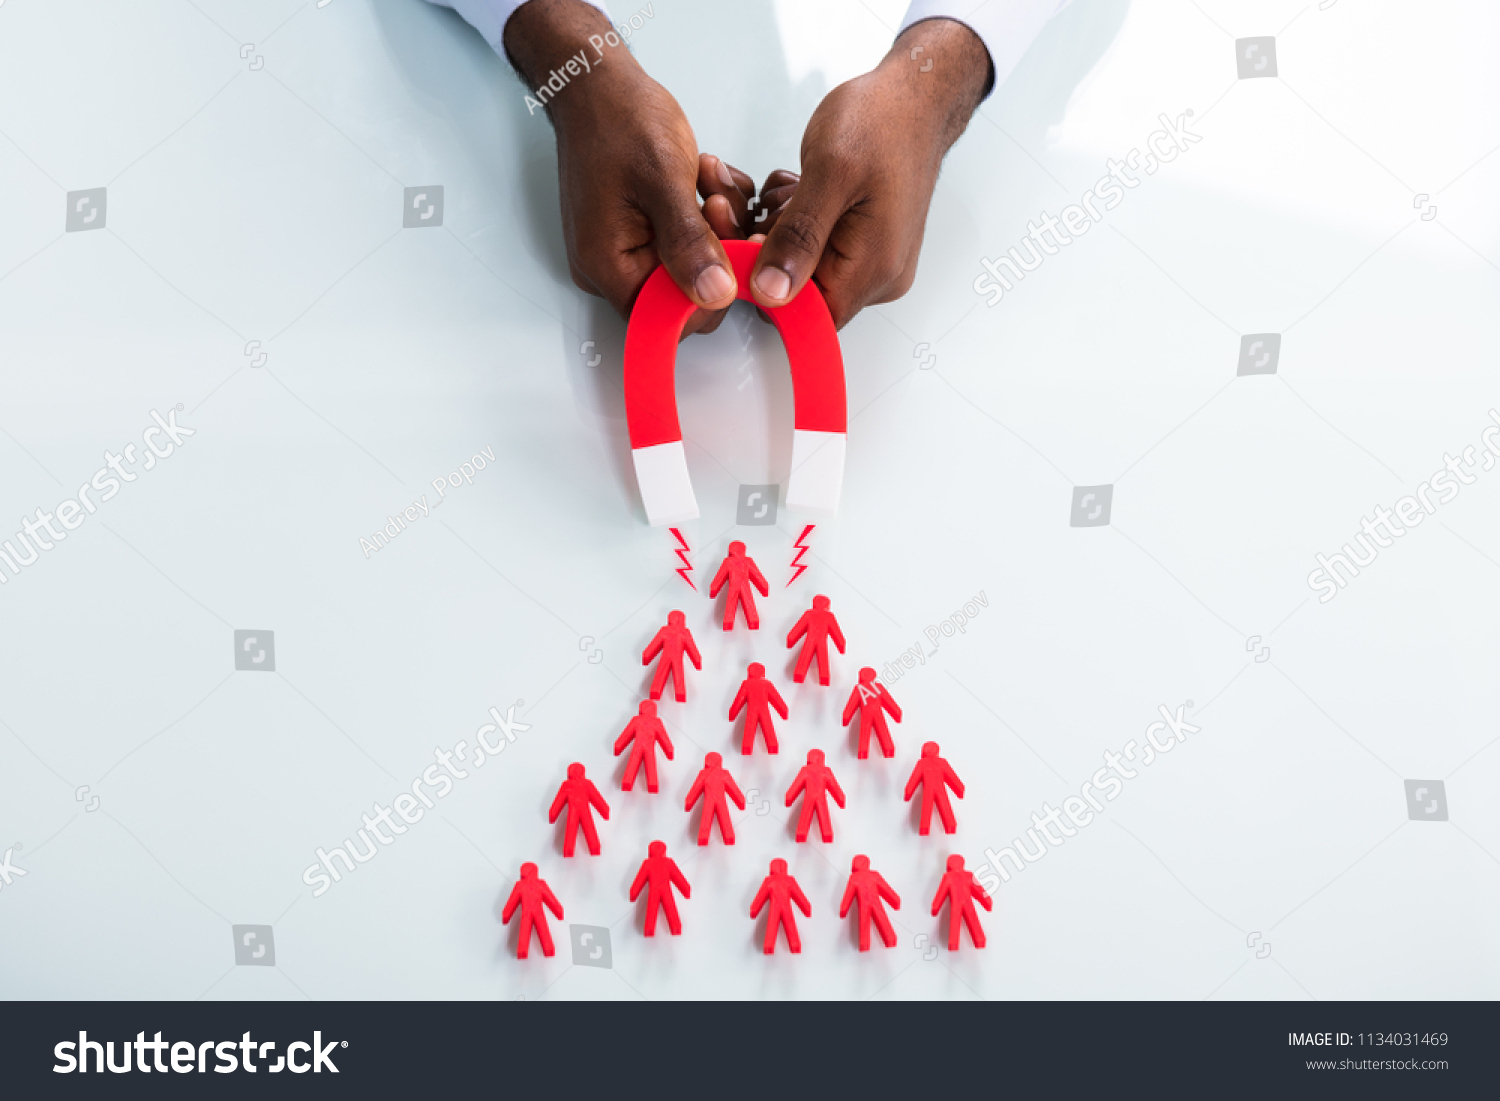 Close-up Of A Human Hand Attracting Red Human Figures With Horseshoe Magnet On White Background #1134031469